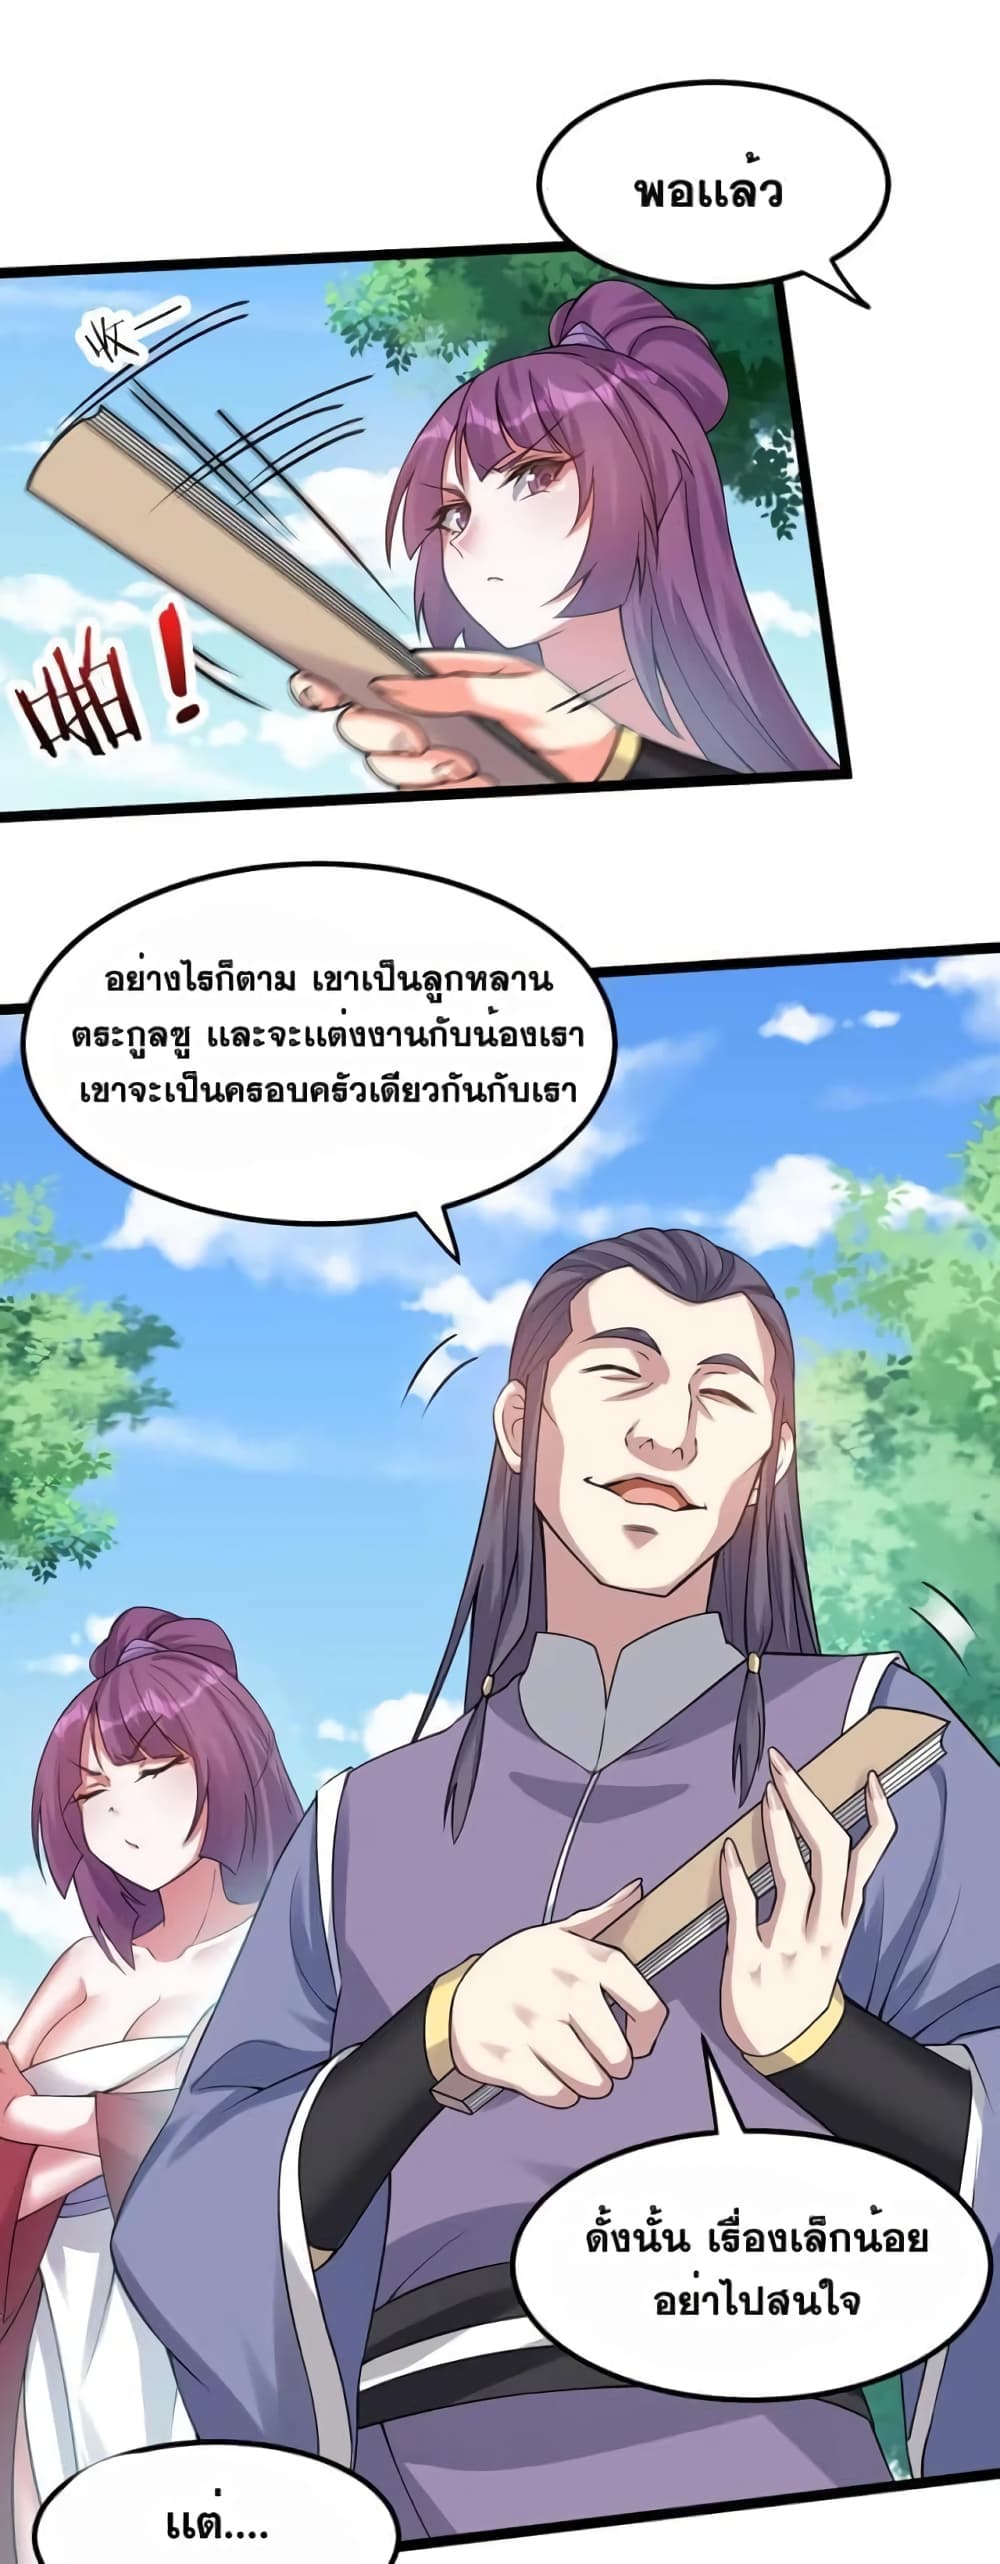 Godsian Masian from Another World ตอนที่ 103 (11)